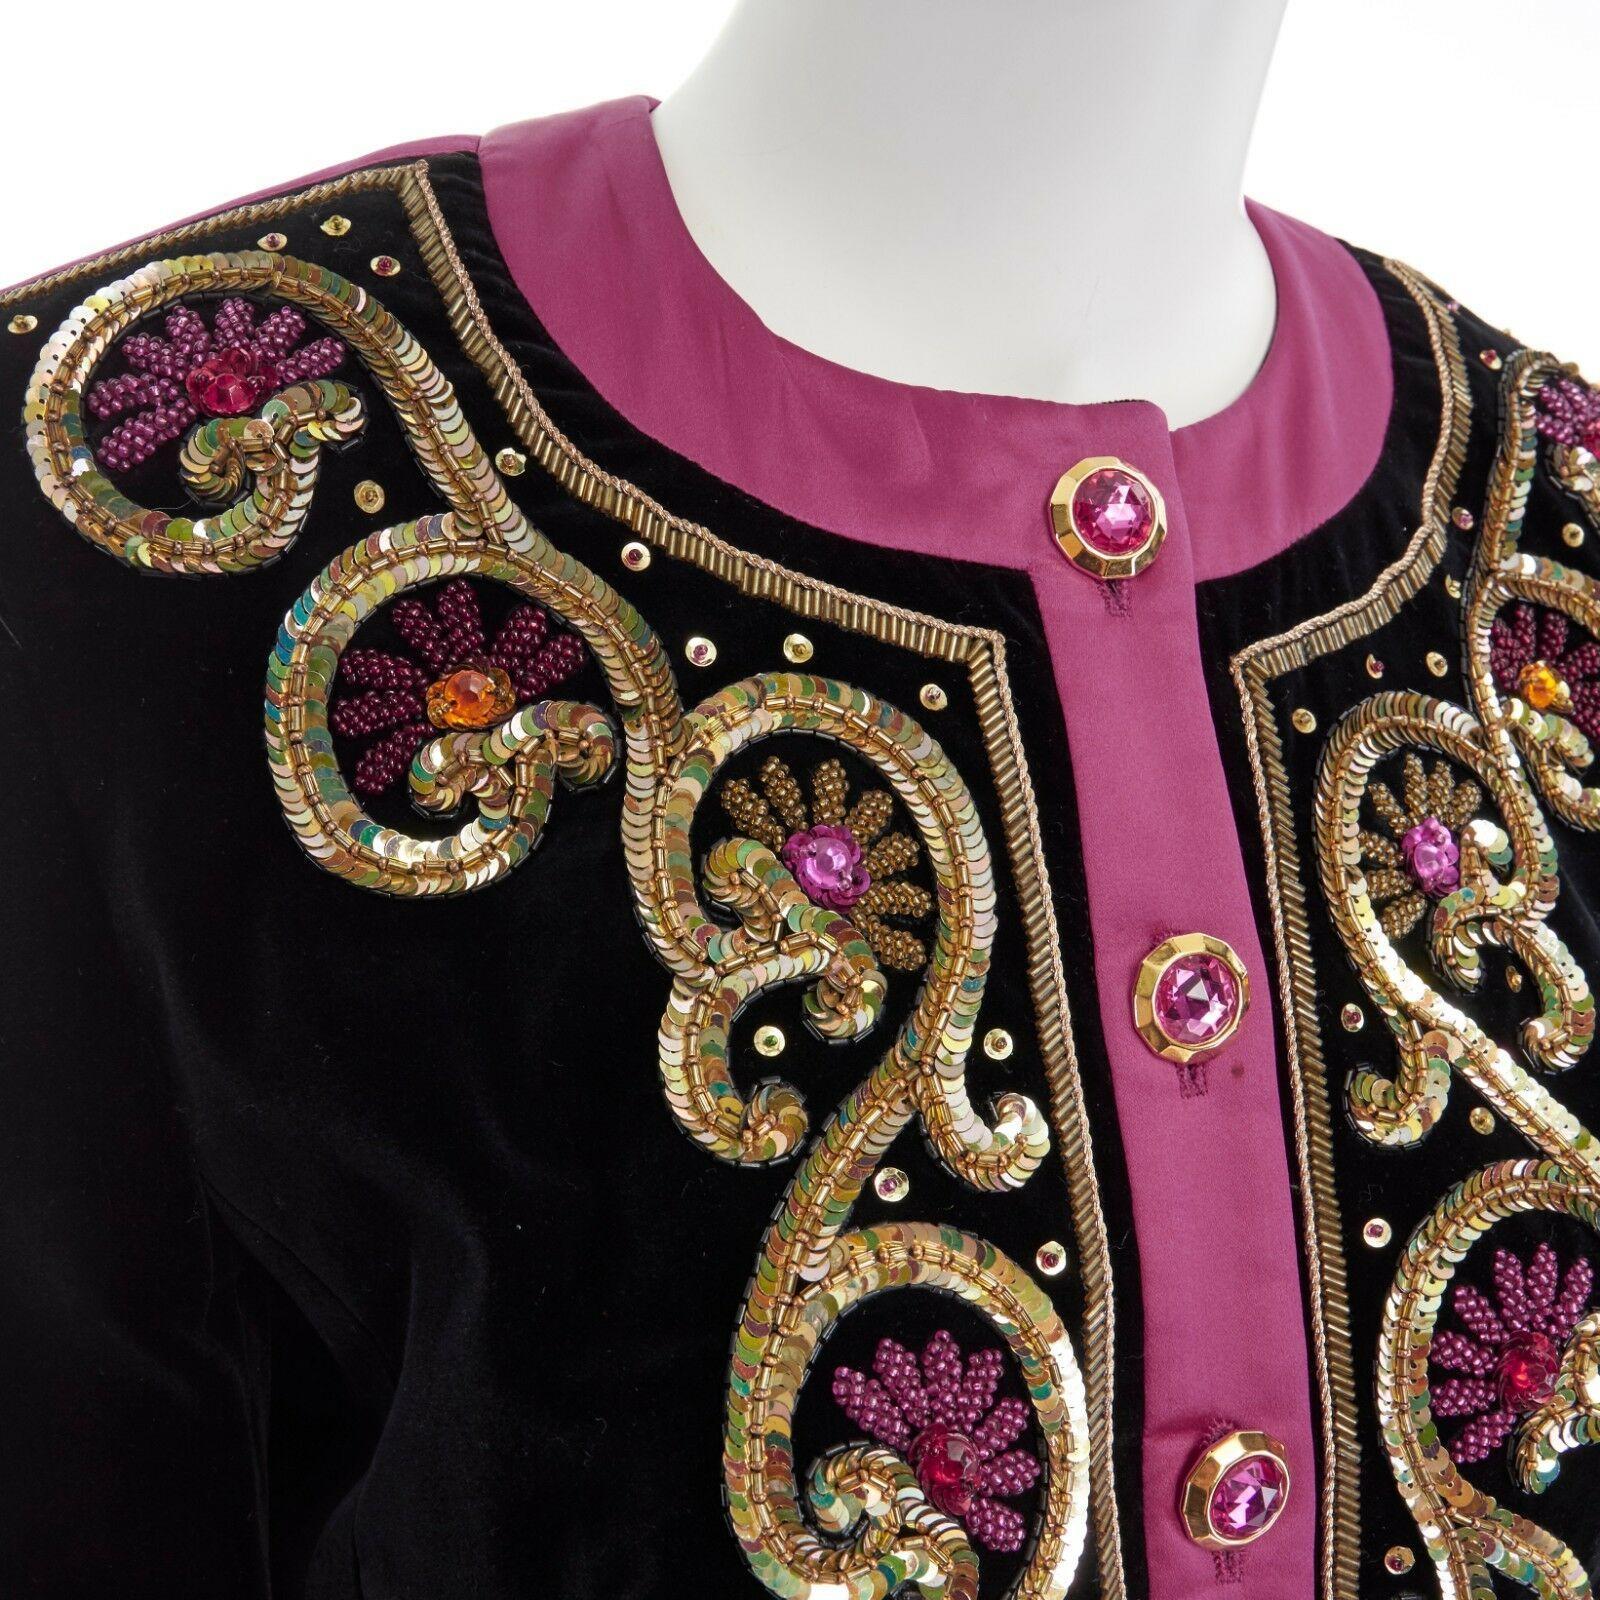 ESCADA MARGARETHA LEY 1980's black velvet gold sequins beaded bolero jacket S
ESCADA BY MARGARETHA LEY
1980's jacket. 
Black velvet. 
Fuschia pink ribbon trimming at collar and along sleeves. 
Round neck. 
Gold-tone pink jewel button front closure.